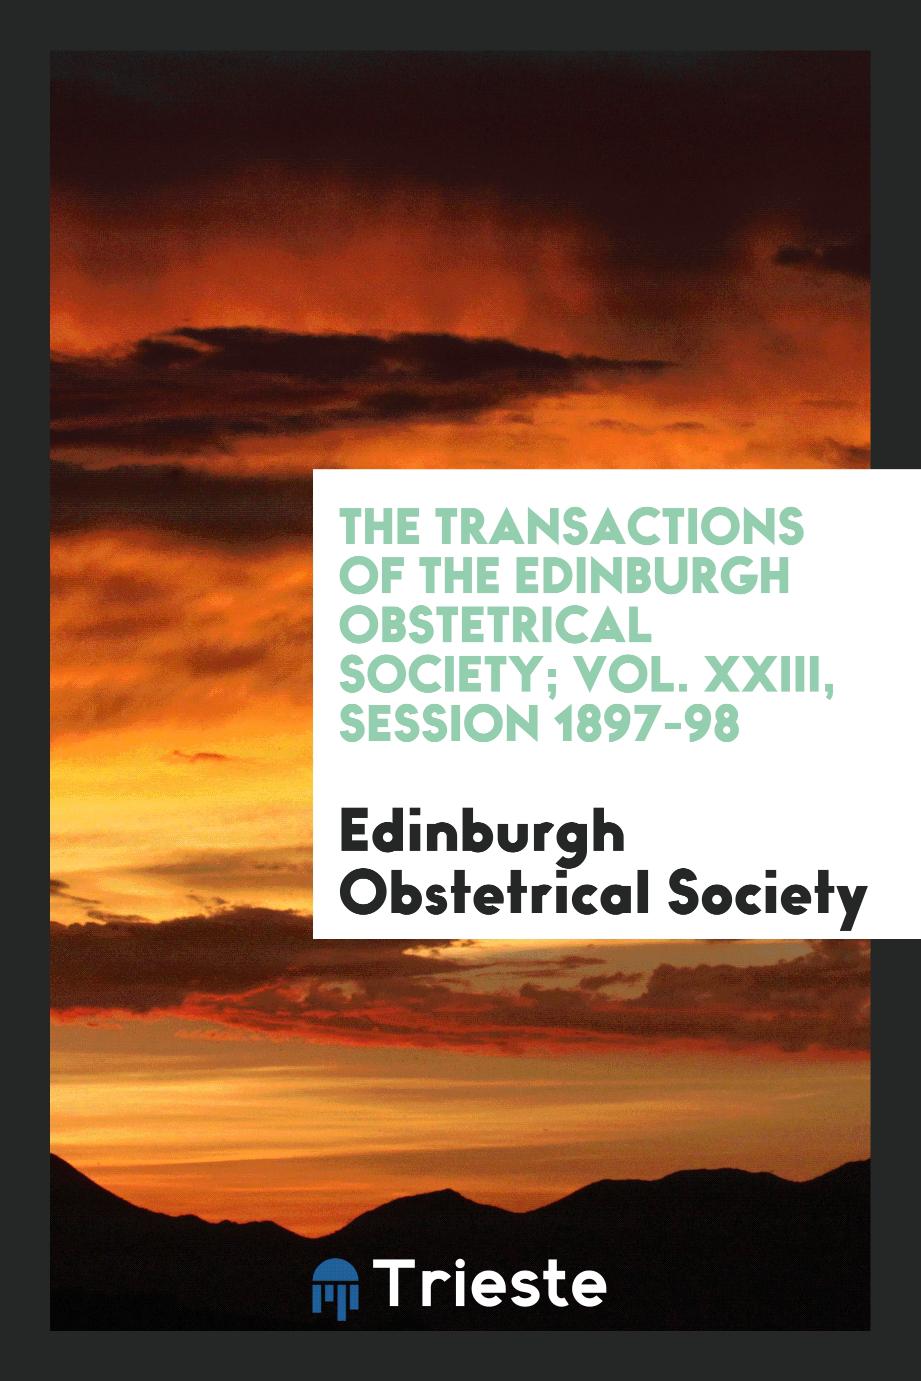 The Transactions of the Edinburgh Obstetrical Society; Vol. XXIII, Session 1897-98